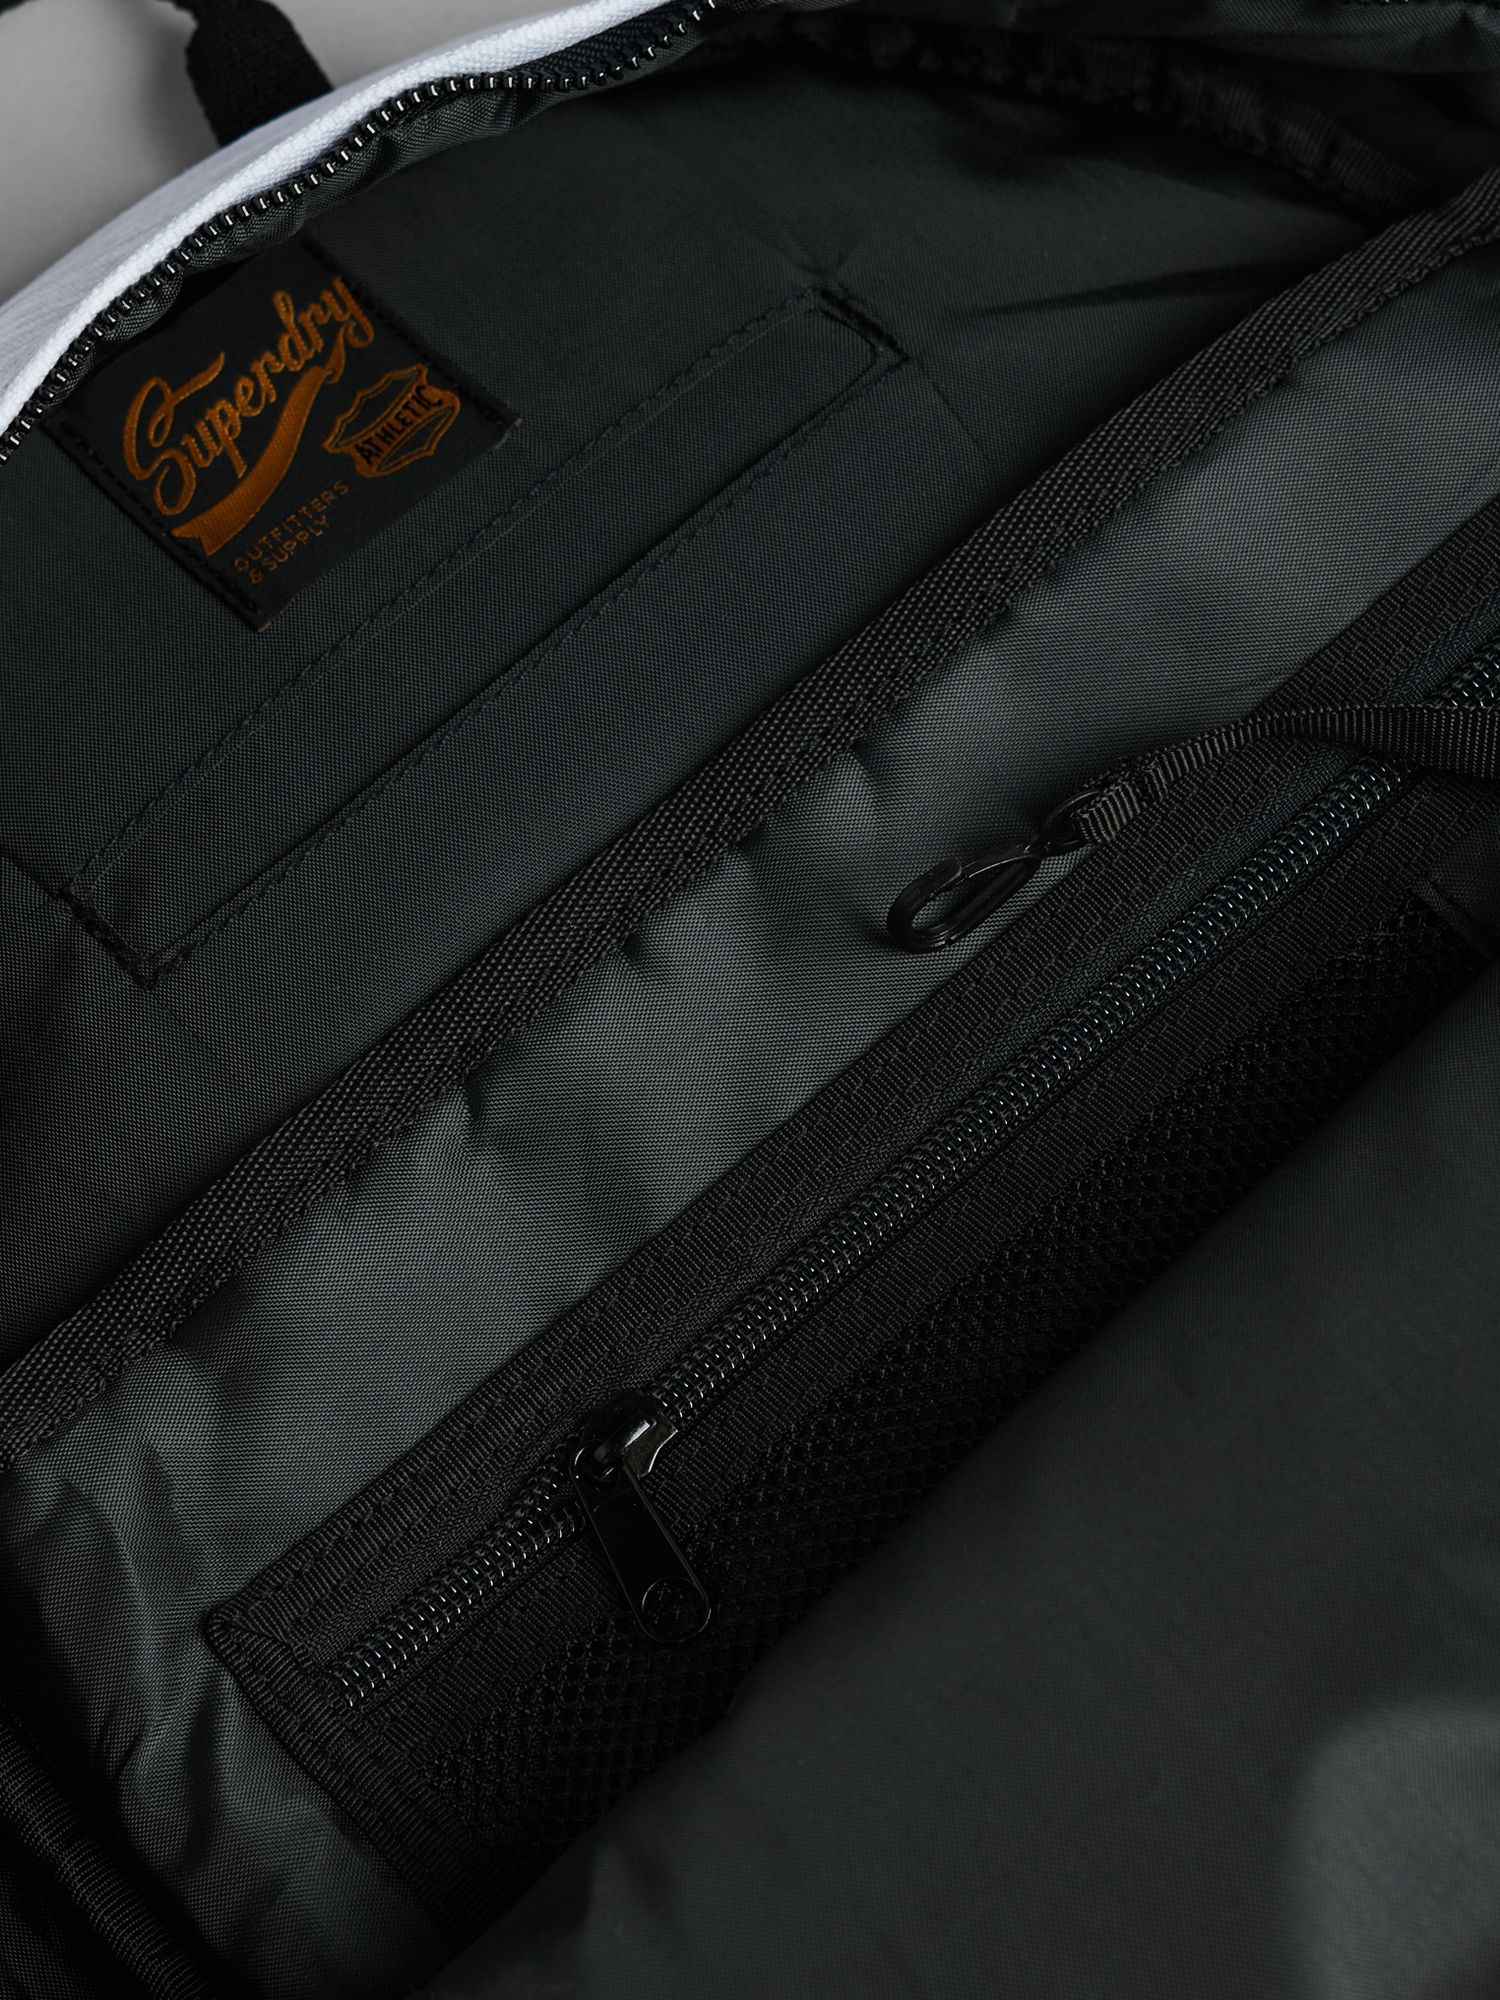 Superdry Graphic Montana Backpack at John Lewis & Partners